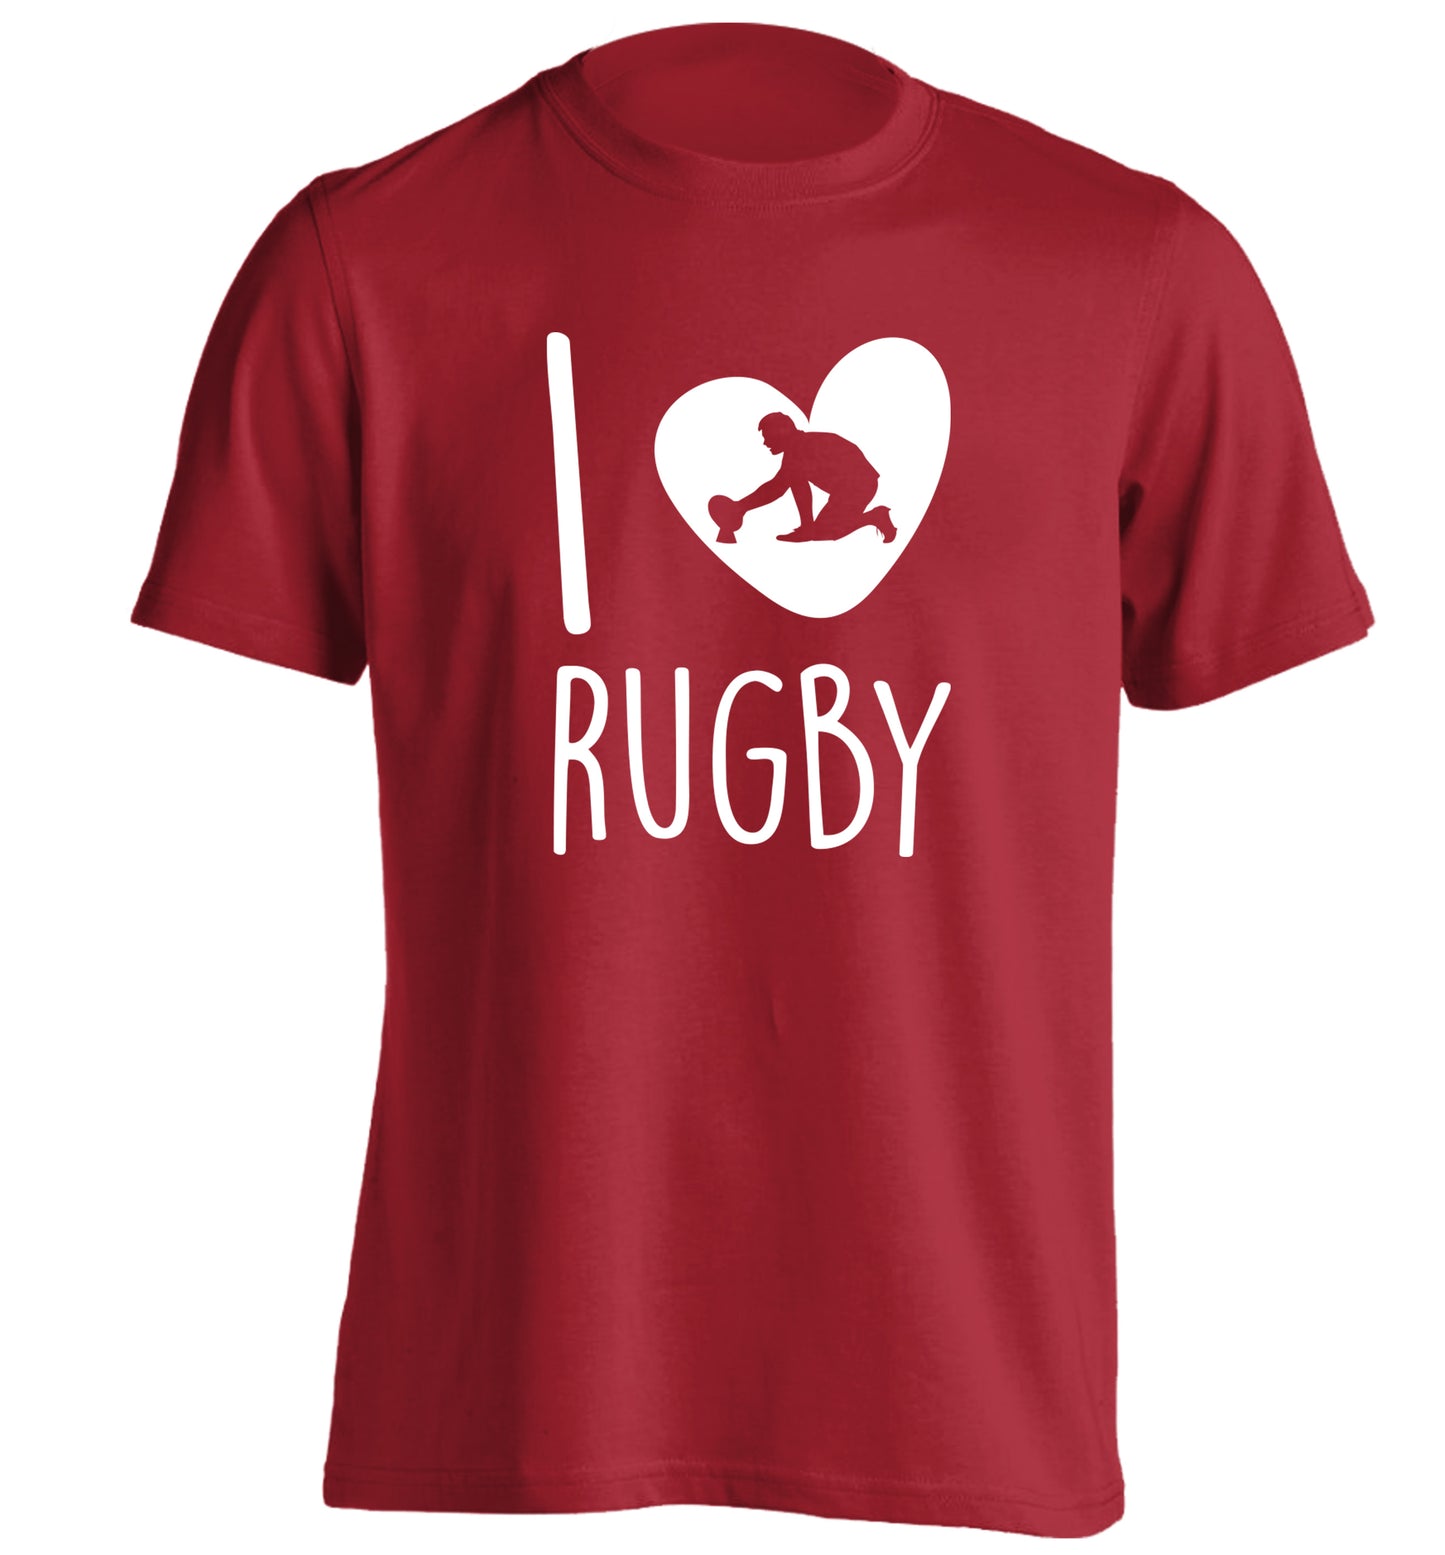 I love rugby adults unisex red Tshirt 2XL